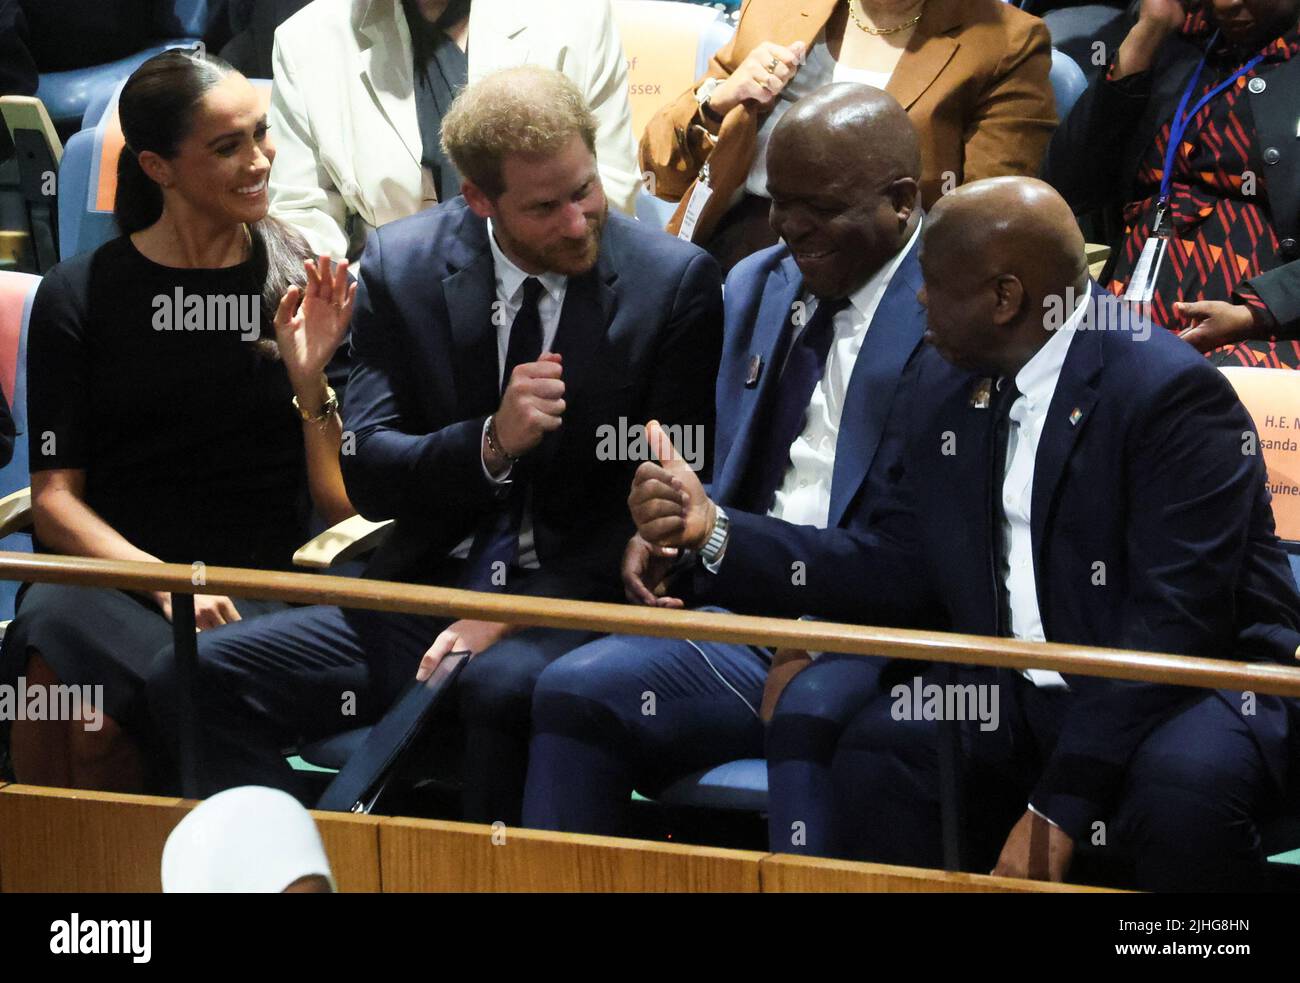 Britain's Prince Harry and his wife Meghan, Duchess of Sussex attend a celebration of Nelson Mandela International Day at the United Nations Headquarters in New York, U.S., July 18, 2022. REUTERS/Shannon Stapleton Stock Photo